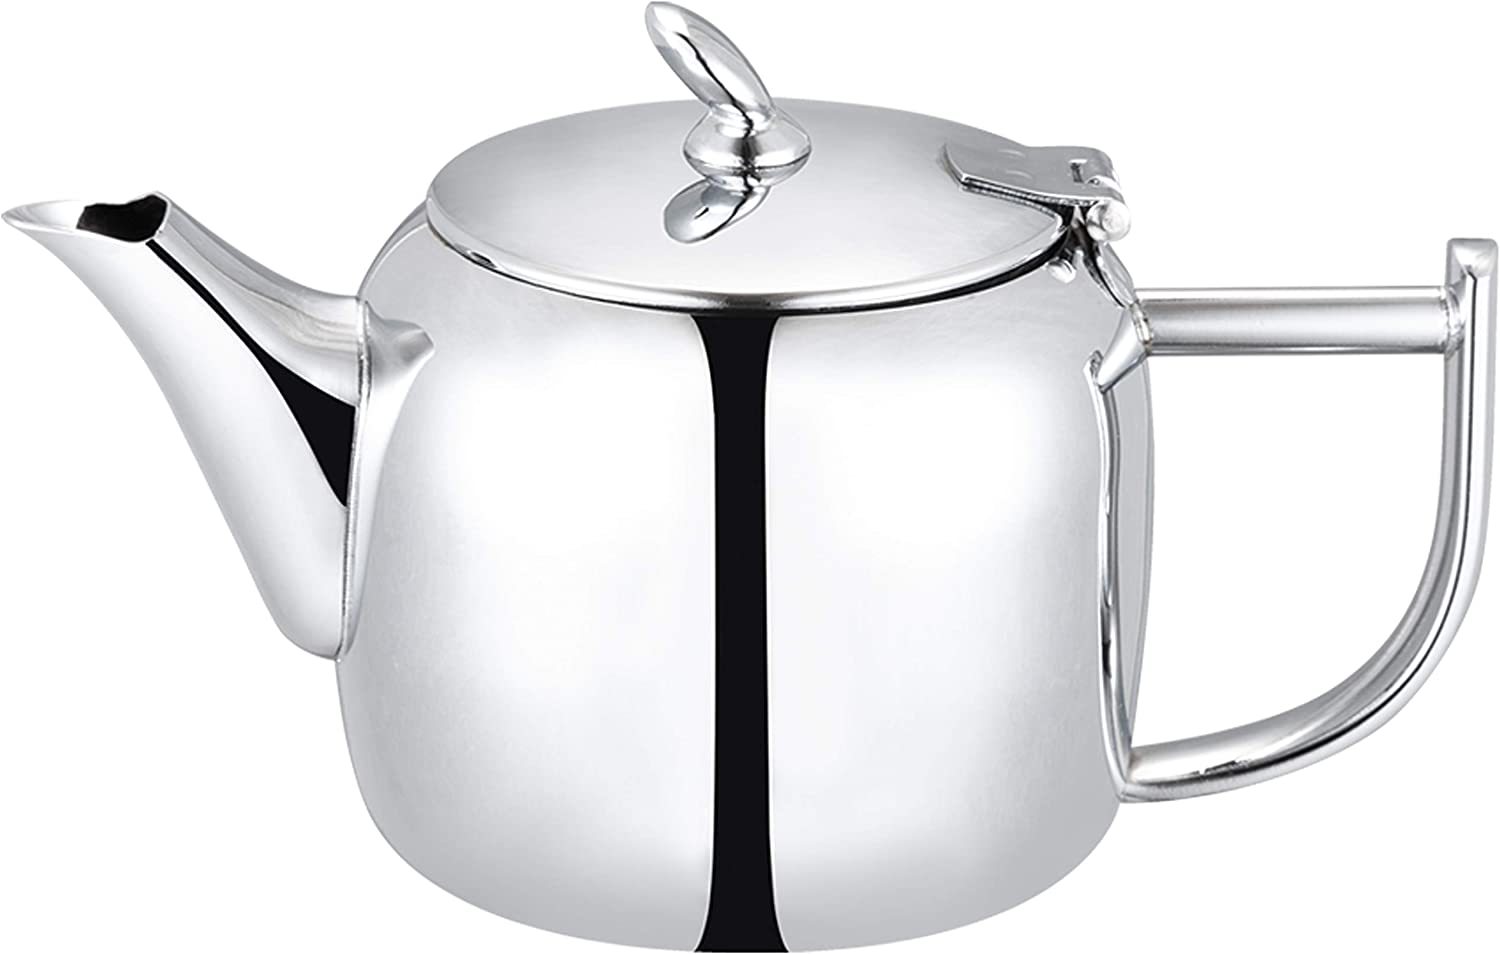 Cafe Ole Café Olé CHT-048 Chatsworth Teapot with Unique Lid Made of High Quality Stainless Steel 18/10 - High Polish Finish, 48 Oz, Drip Free Casting, Stainless Steel, 48 Ounces